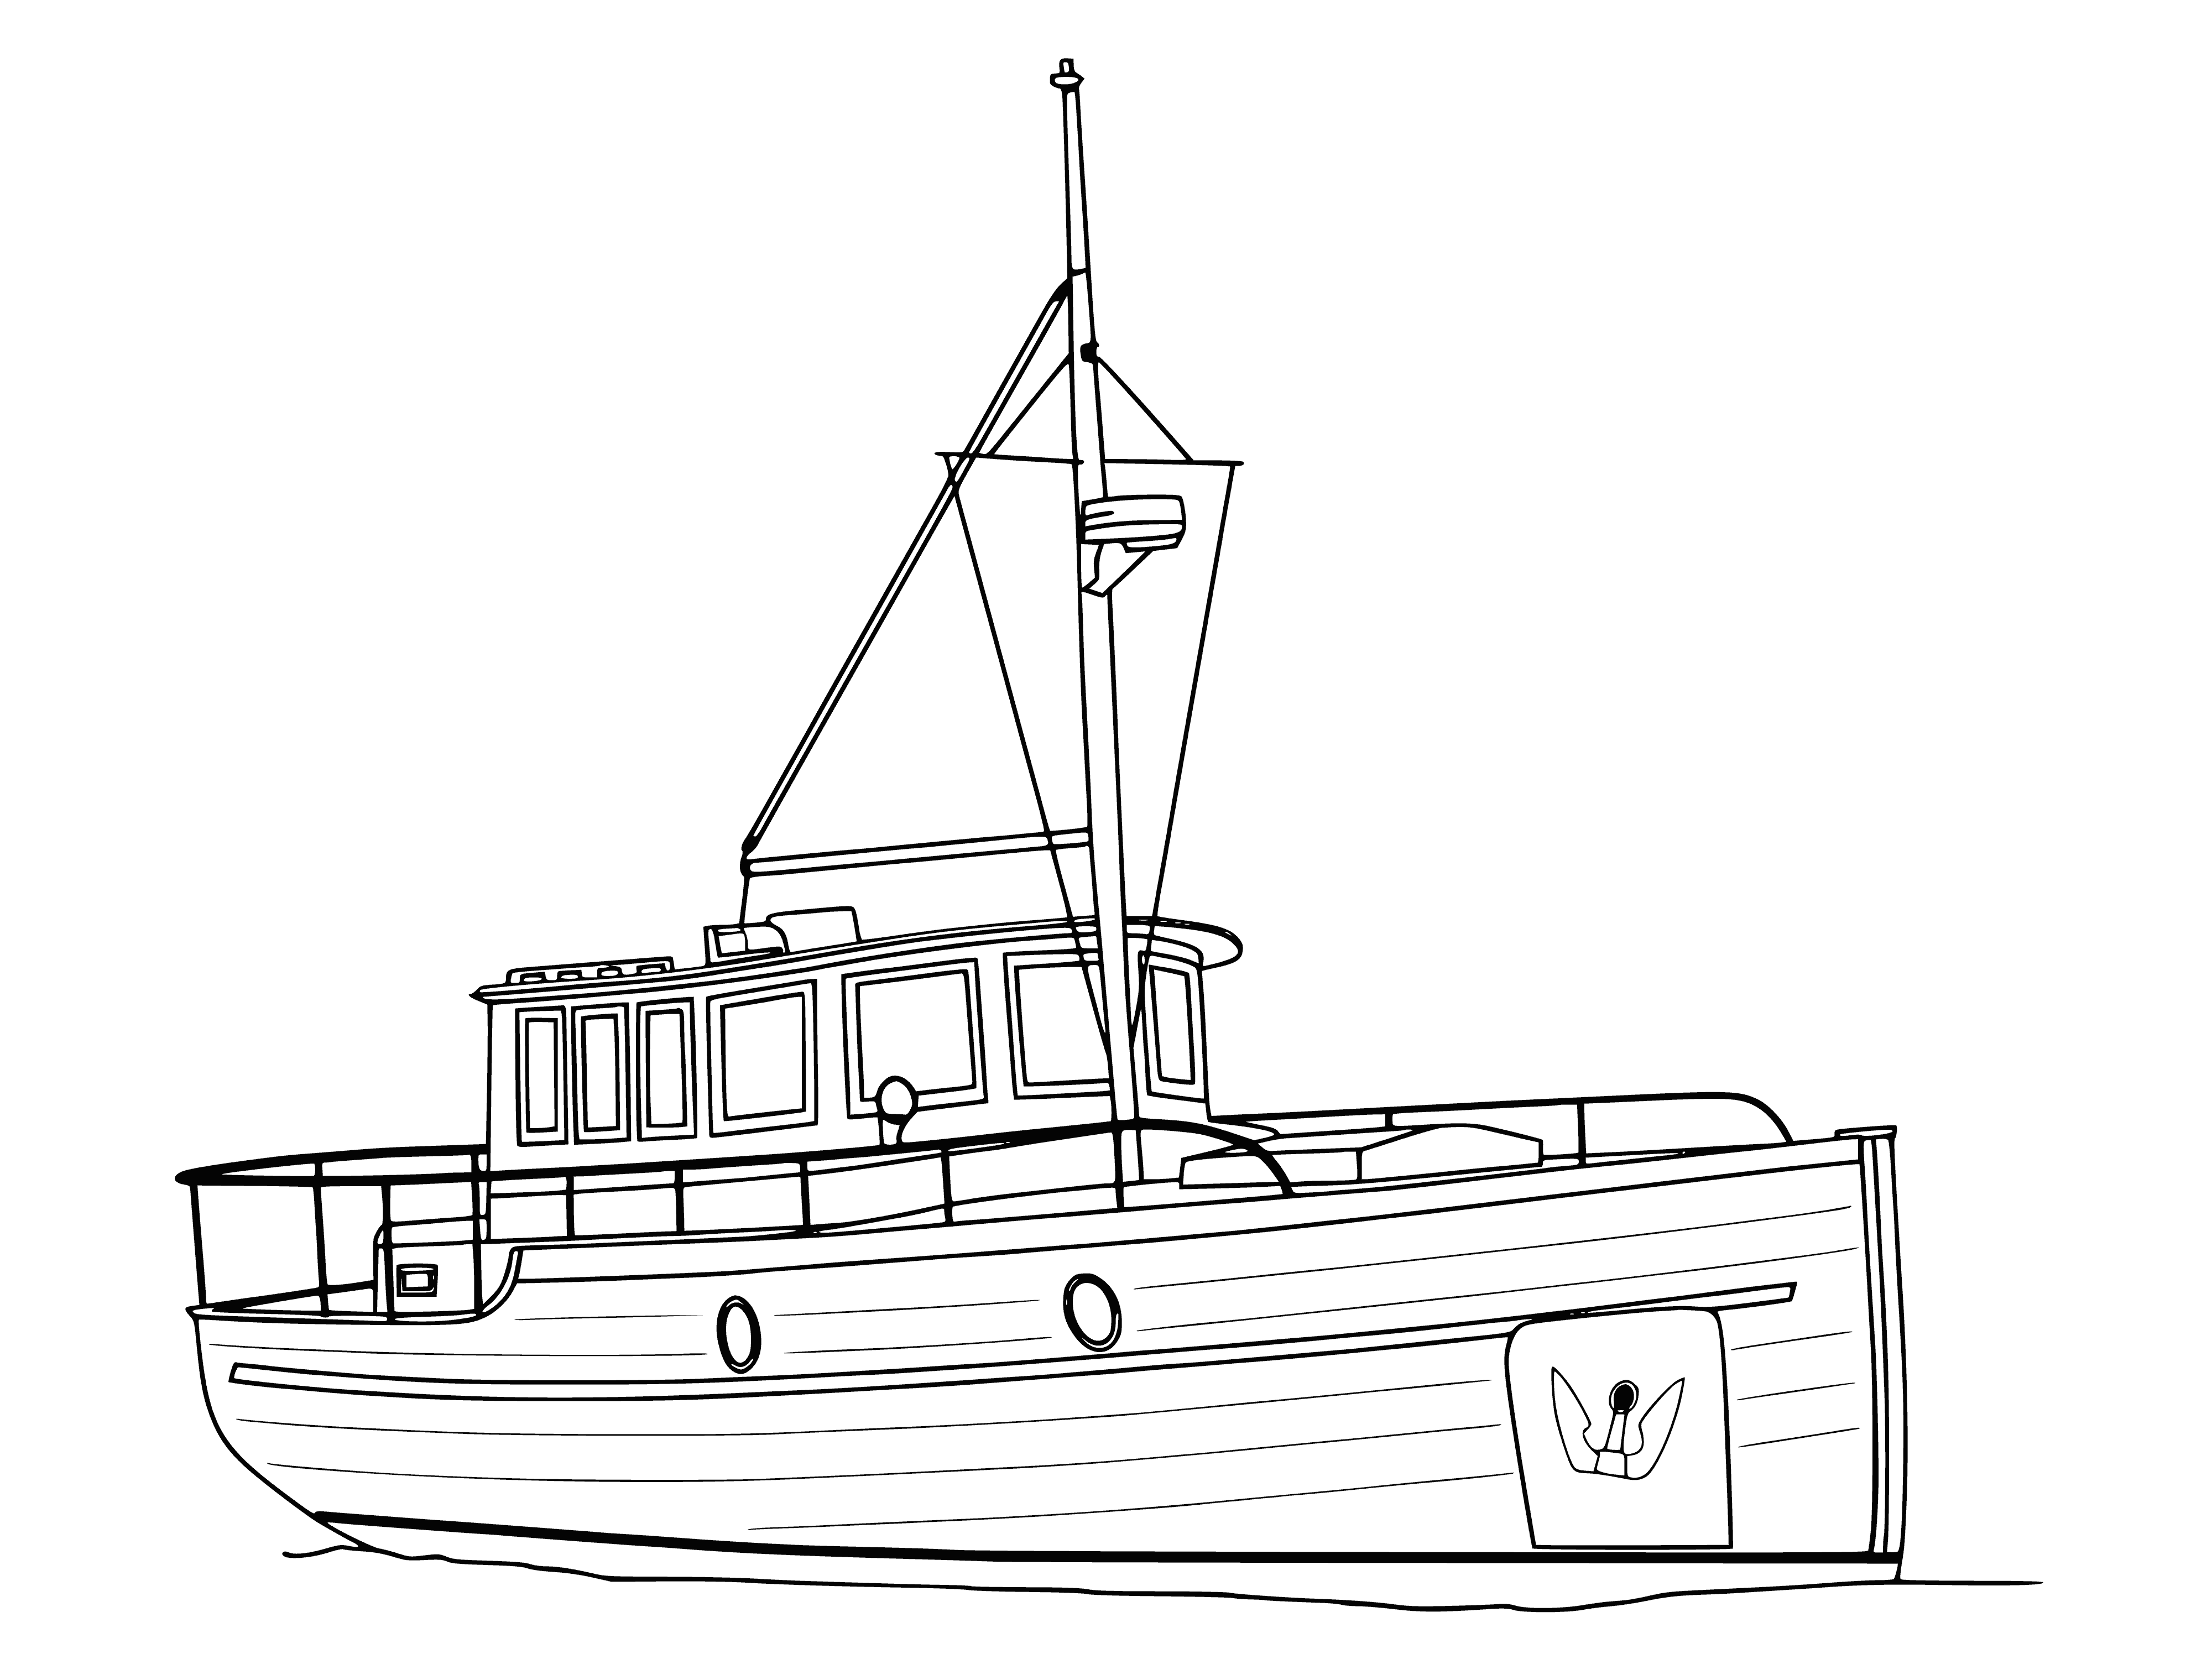 coloring page: A white ship with red stripes and sails sails in calm sea with a red flag on the mast. #ColoringPage